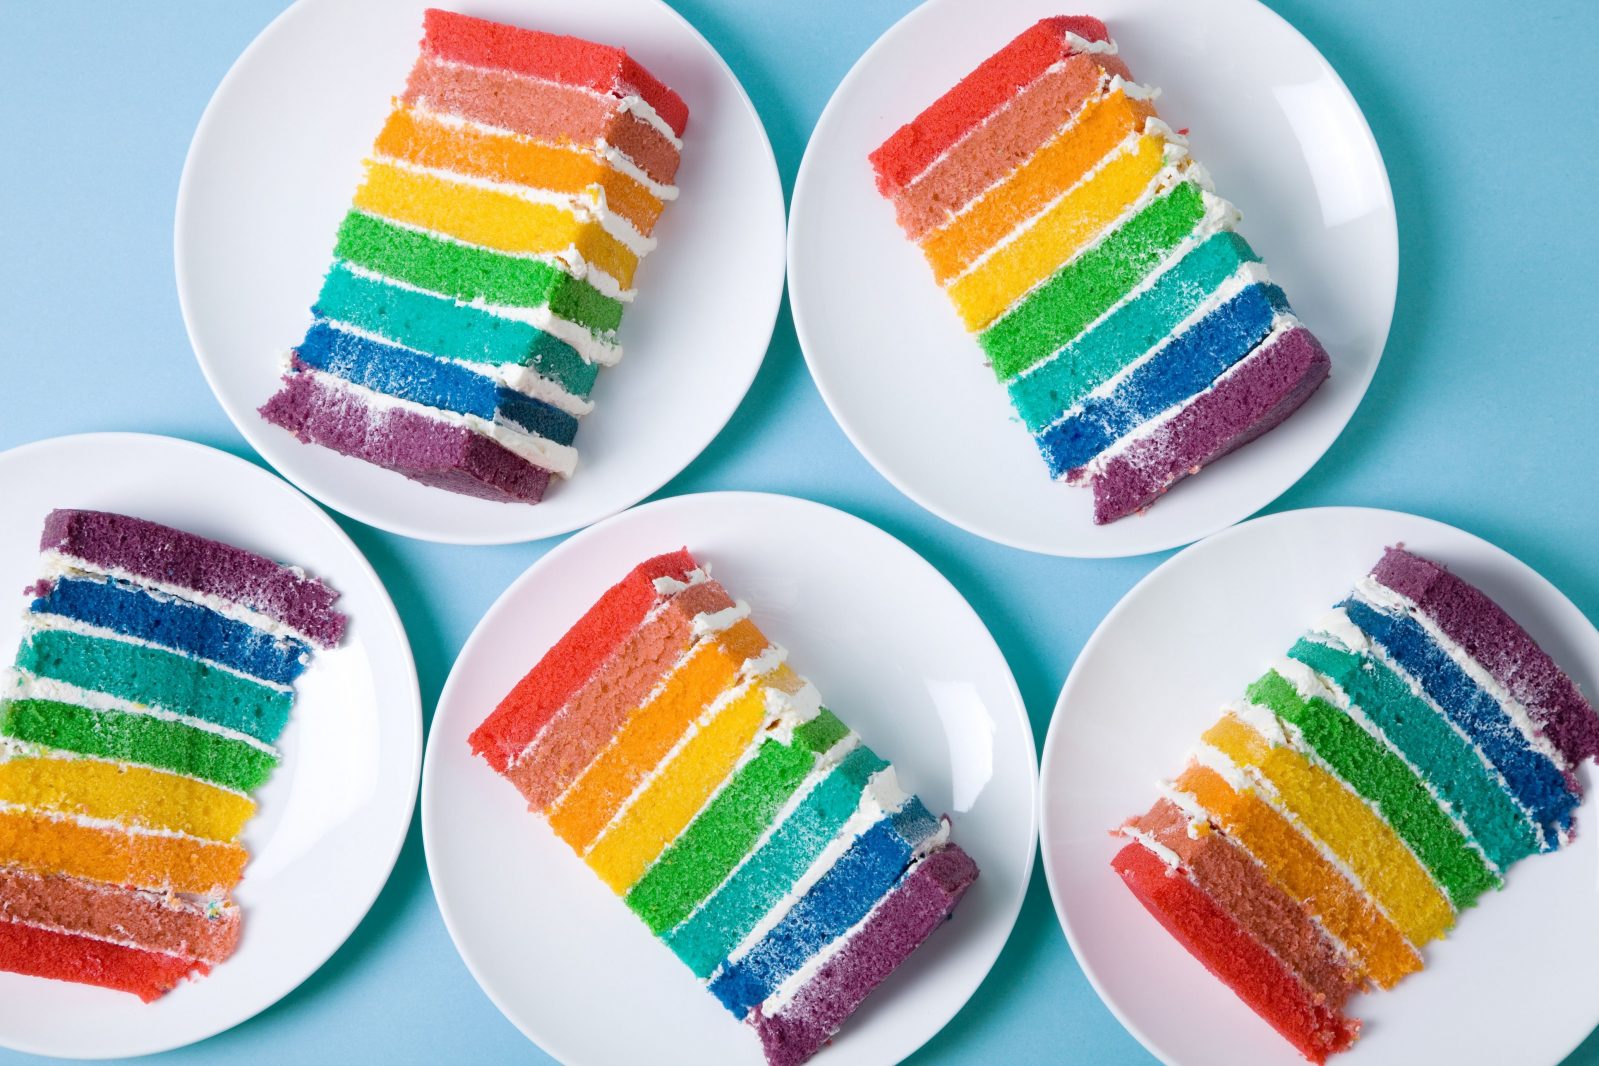 If You Get 16/25 on This Random Knowledge Quiz, You Know Something About Every Subject Rainbow cake